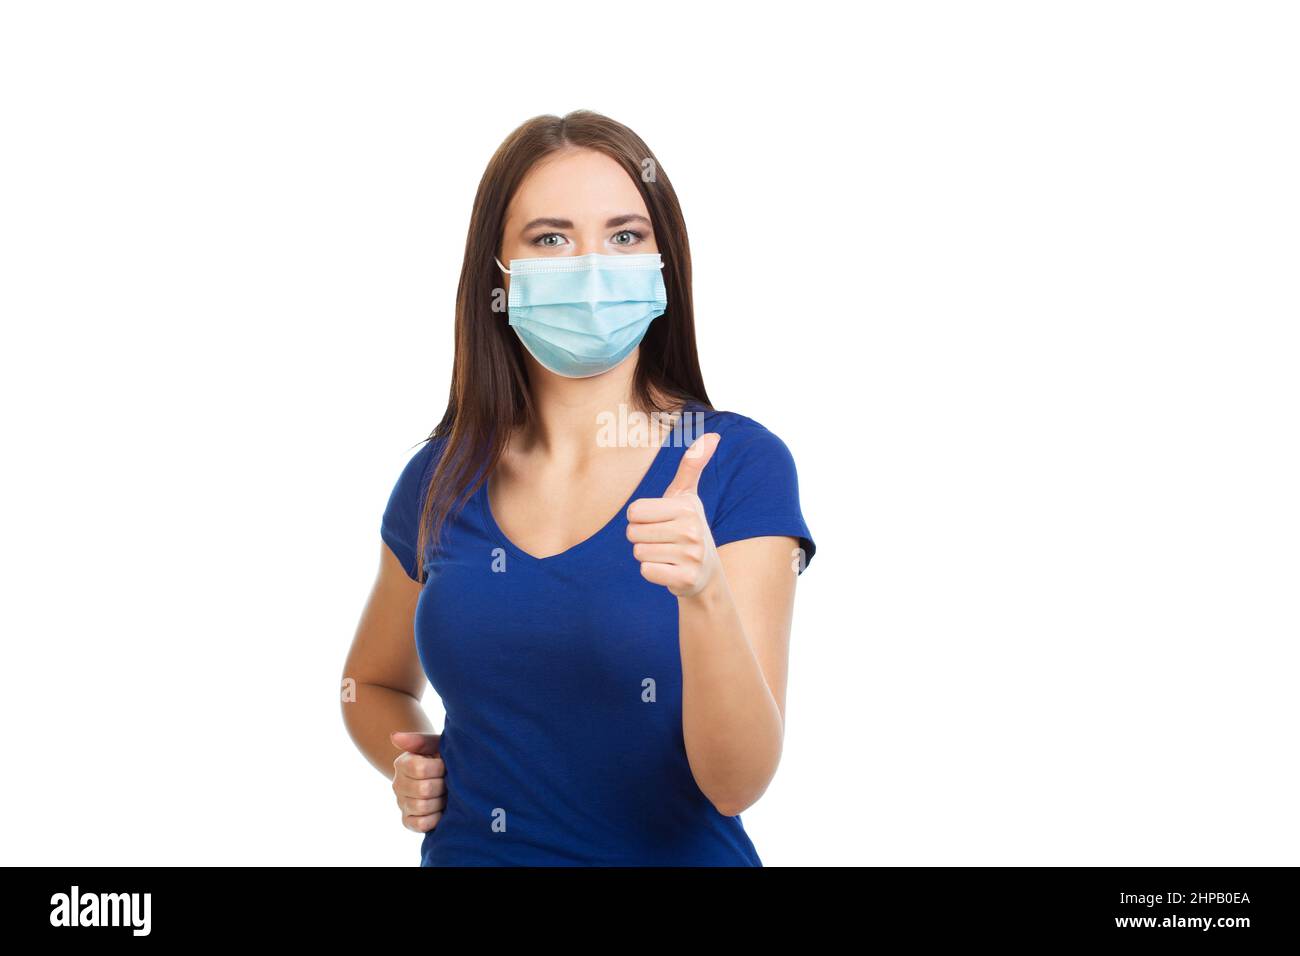 Girl in a medical mask shows a thumbs up gesture. Isolated on a white background. Stock Photo